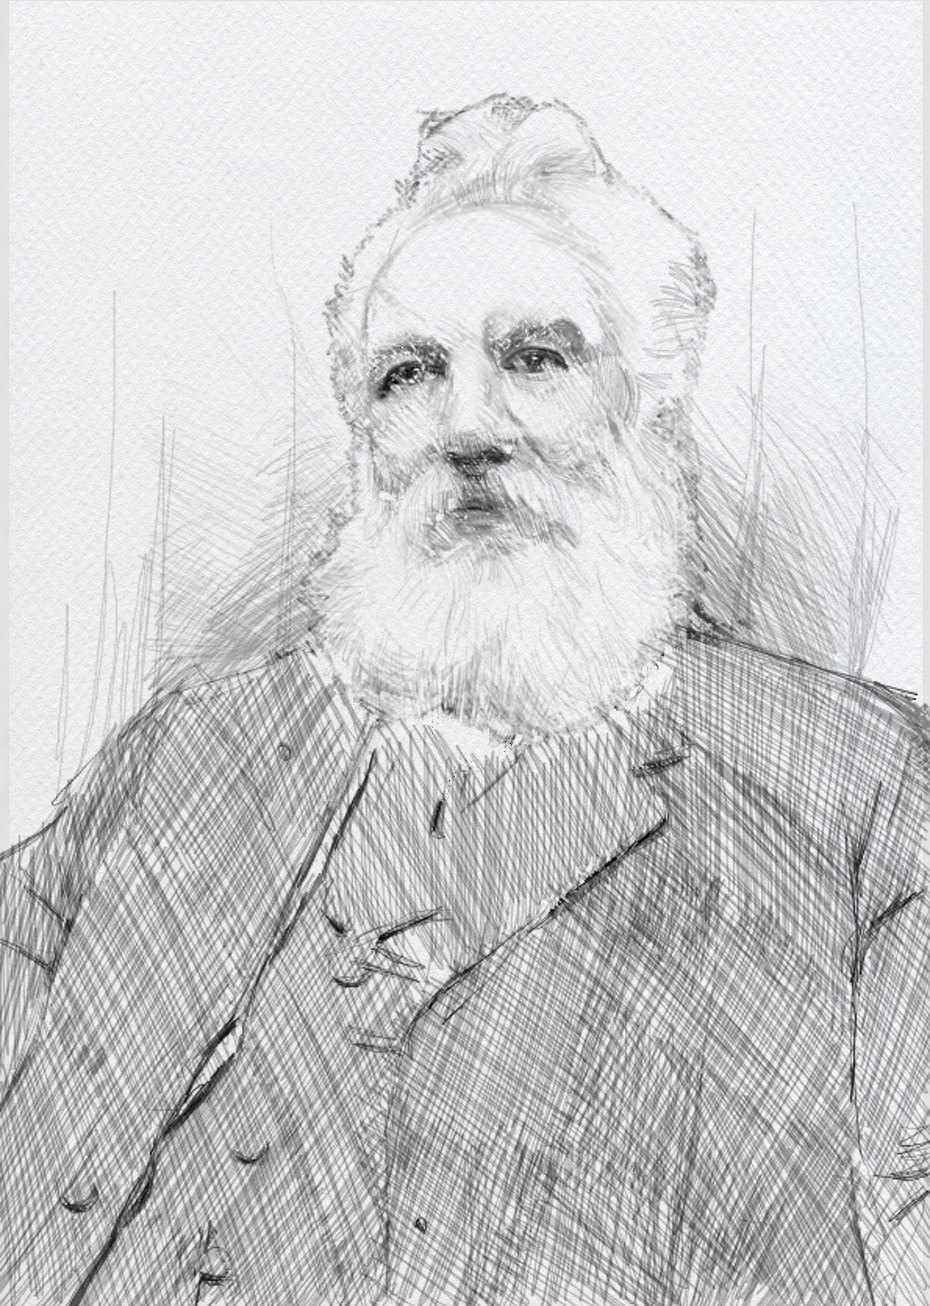 Alexander Graham Bell graham bell Scientist inventor engineer telephone hearing devices  famous invention  pencil sketch Pencil drawing fine art drawing portrait sketch Sketch of scientist